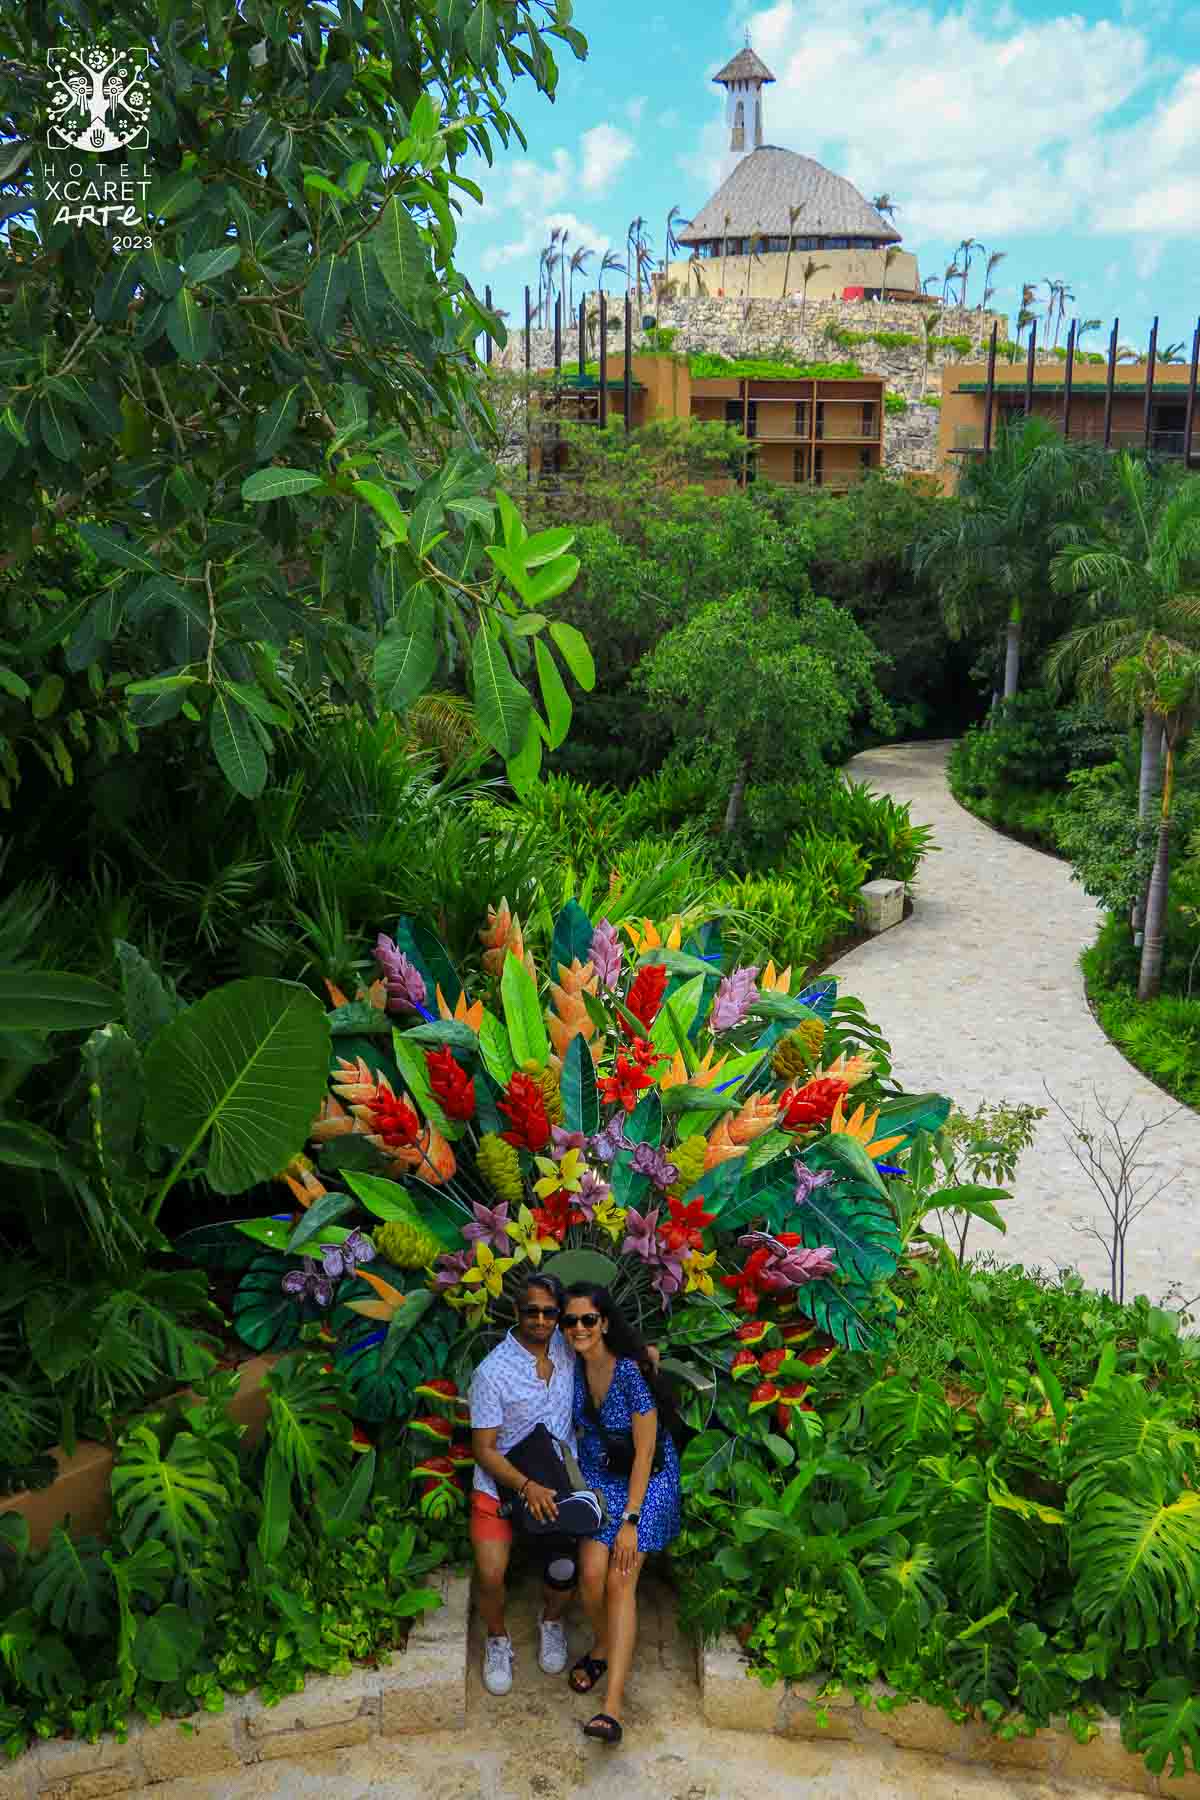 A xelfie taken in Xcaret Arte of Riz and Reem sitting in a chair surrounded by flowers and greenery. The pyramid can be seen in the background.